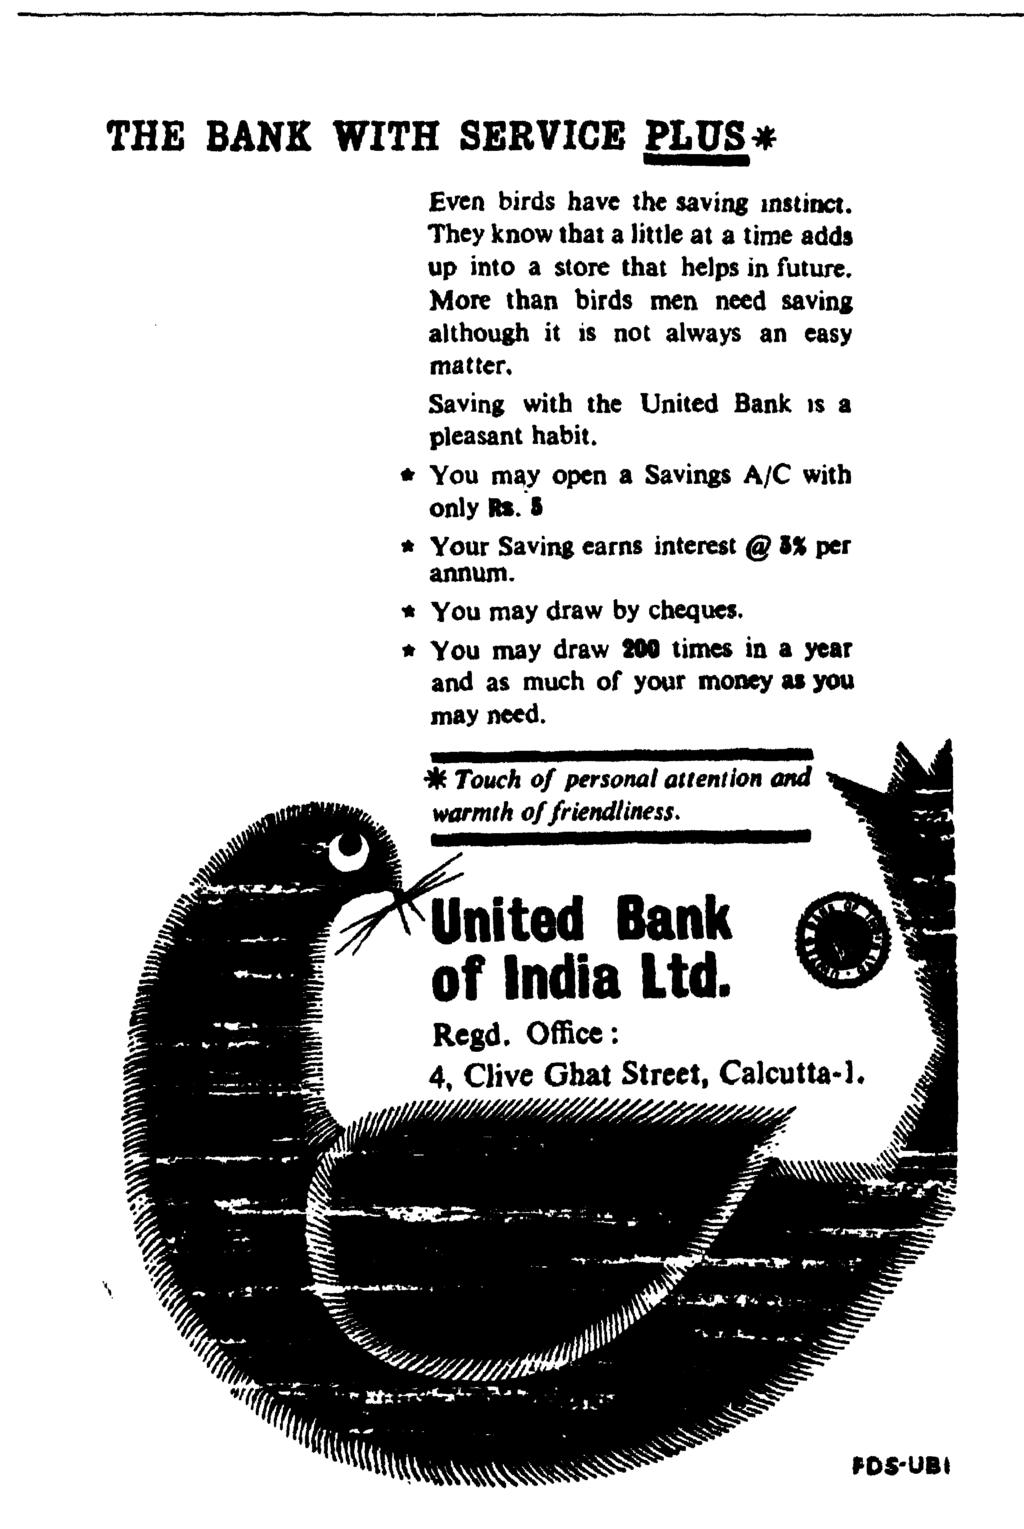 THE ECONOMIC WEEKLY June 13, 1964 comparatively big units. The National Small Industries Corporation gave loans to 16.7 per cent of the units and financed 5.